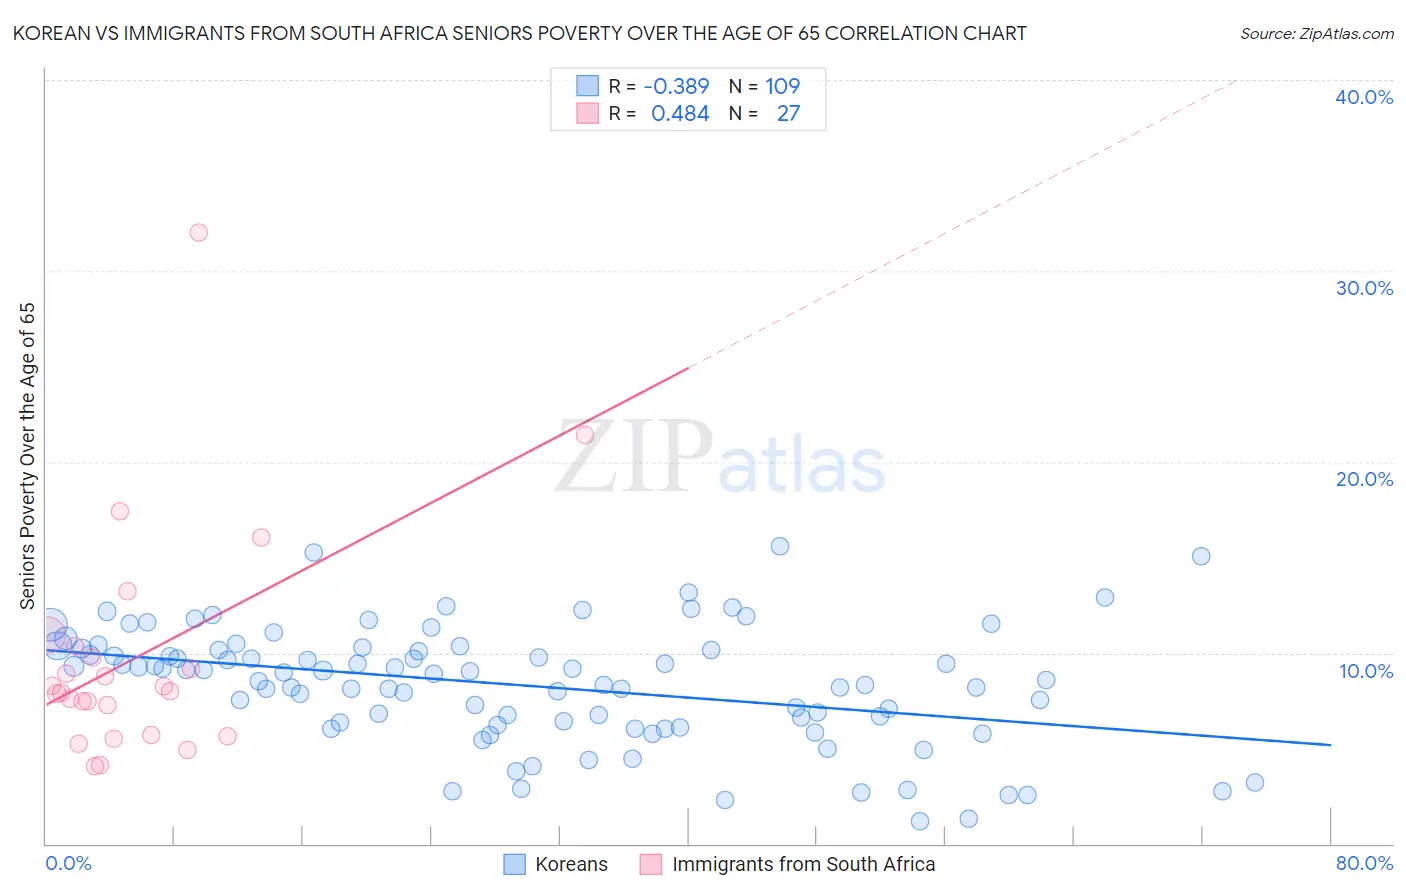 Korean vs Immigrants from South Africa Seniors Poverty Over the Age of 65